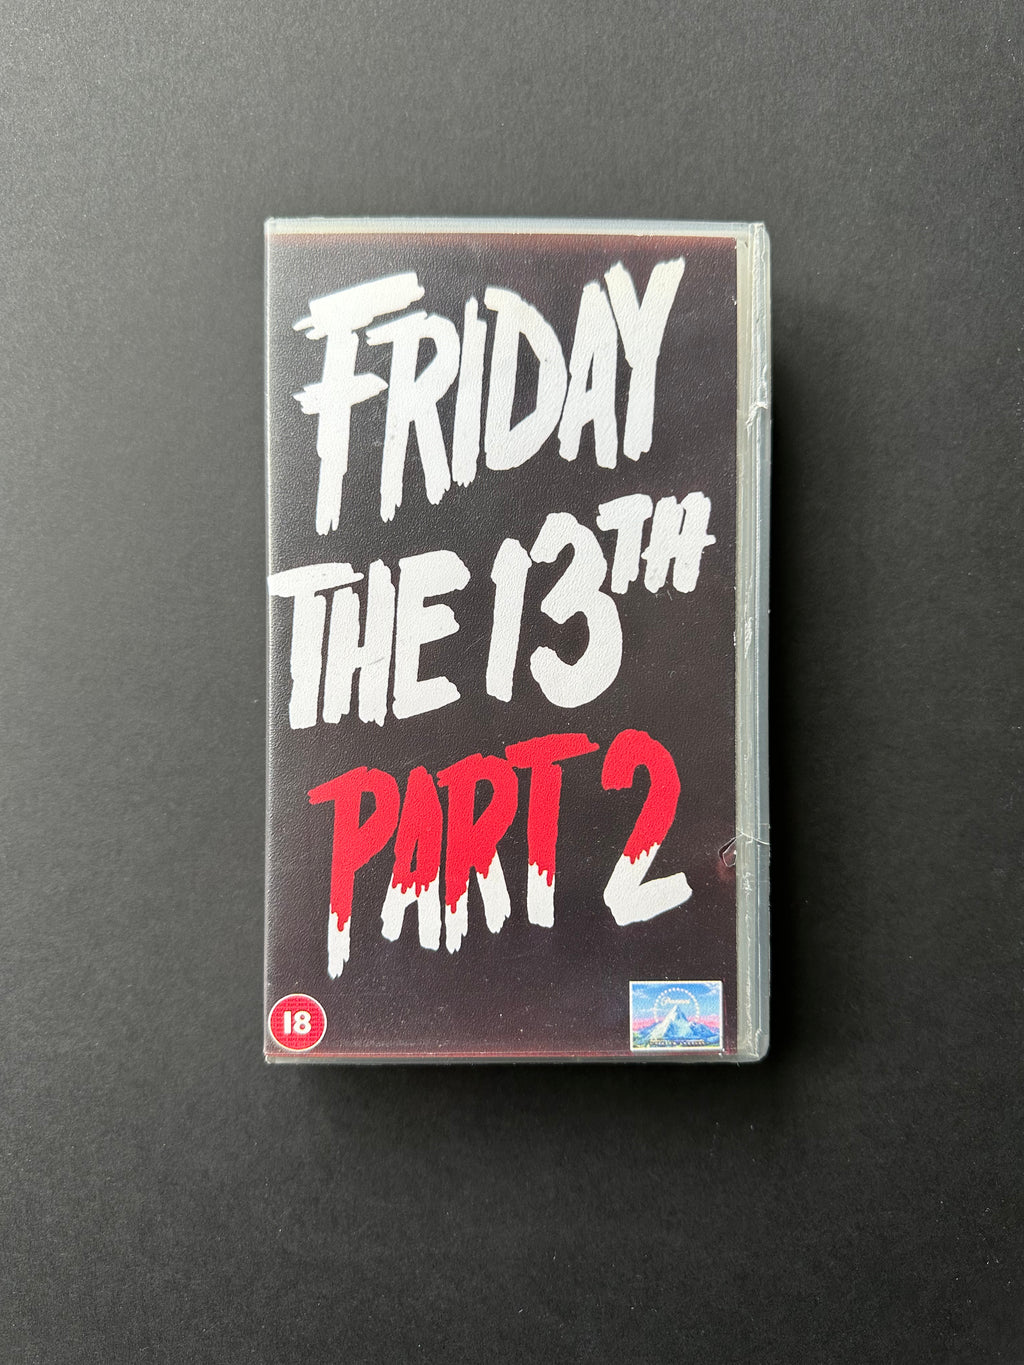 Friday 13th: Part 2 (1981) - An autographed VHS Tape